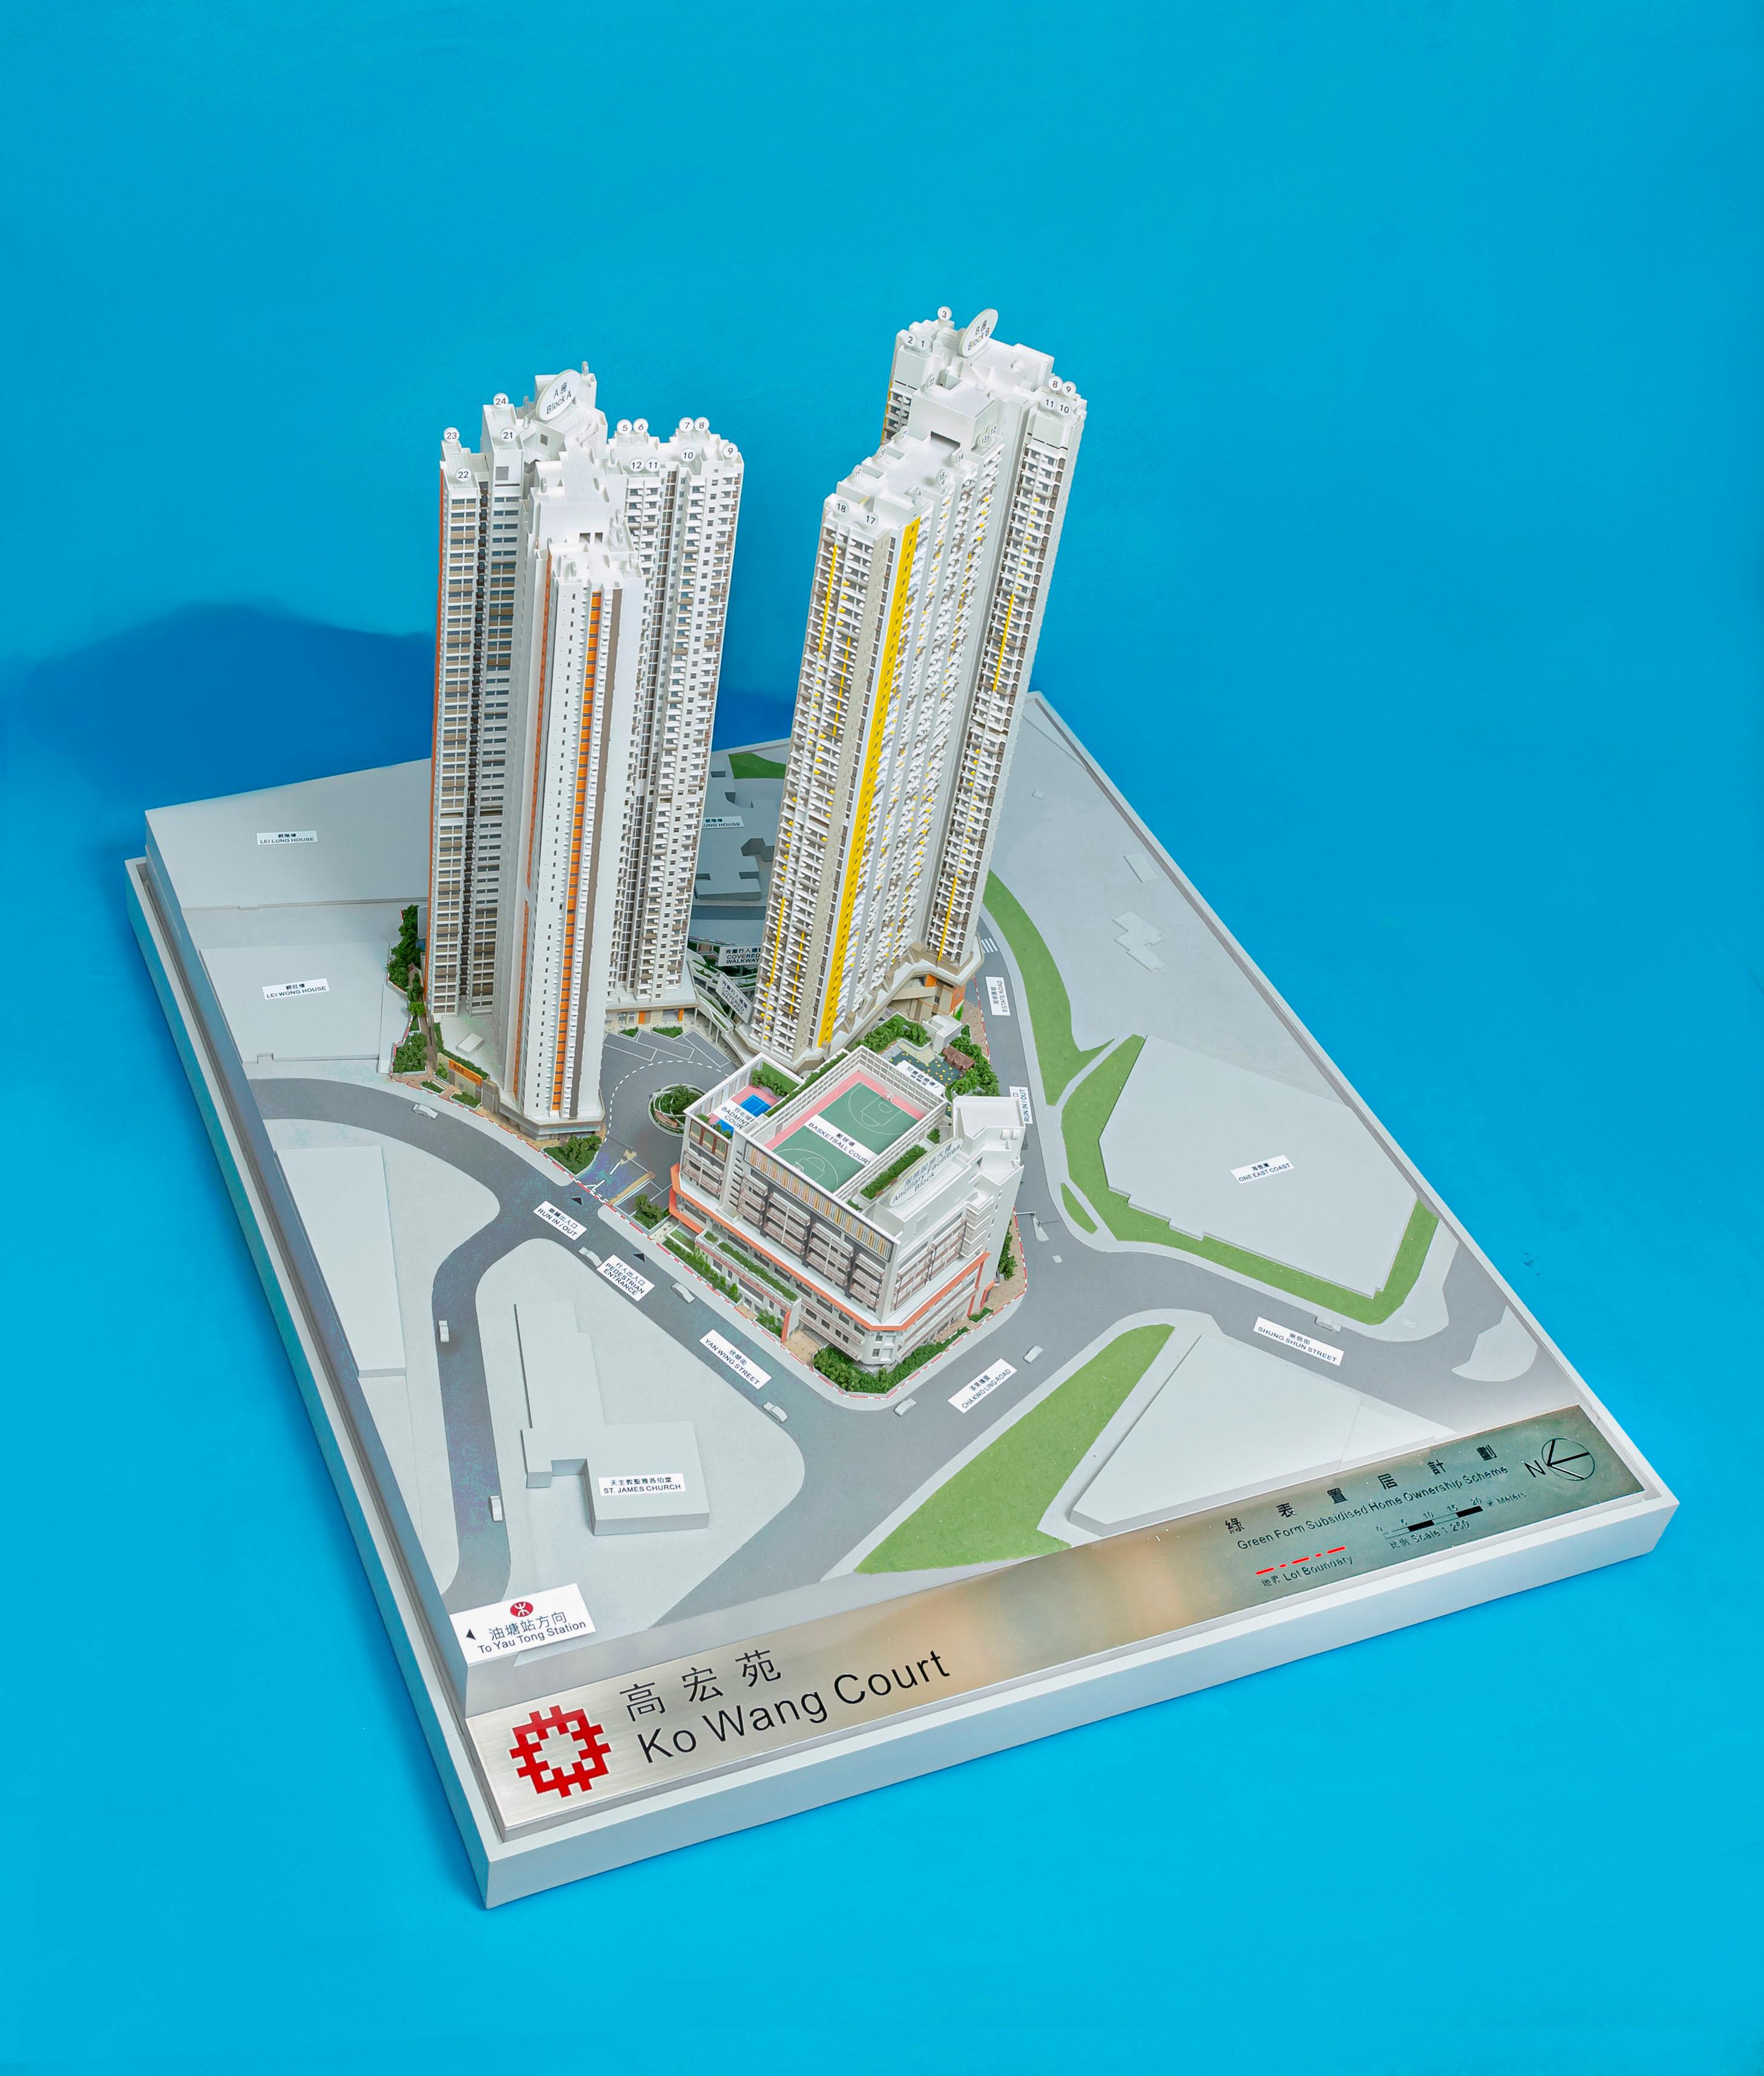 Application for purchase under the Sale of Green Form Subsidised Home Ownership Scheme Flats 2022 will start on September 29. Photo shows a model of Ko Wang Court, a new development project under the scheme.